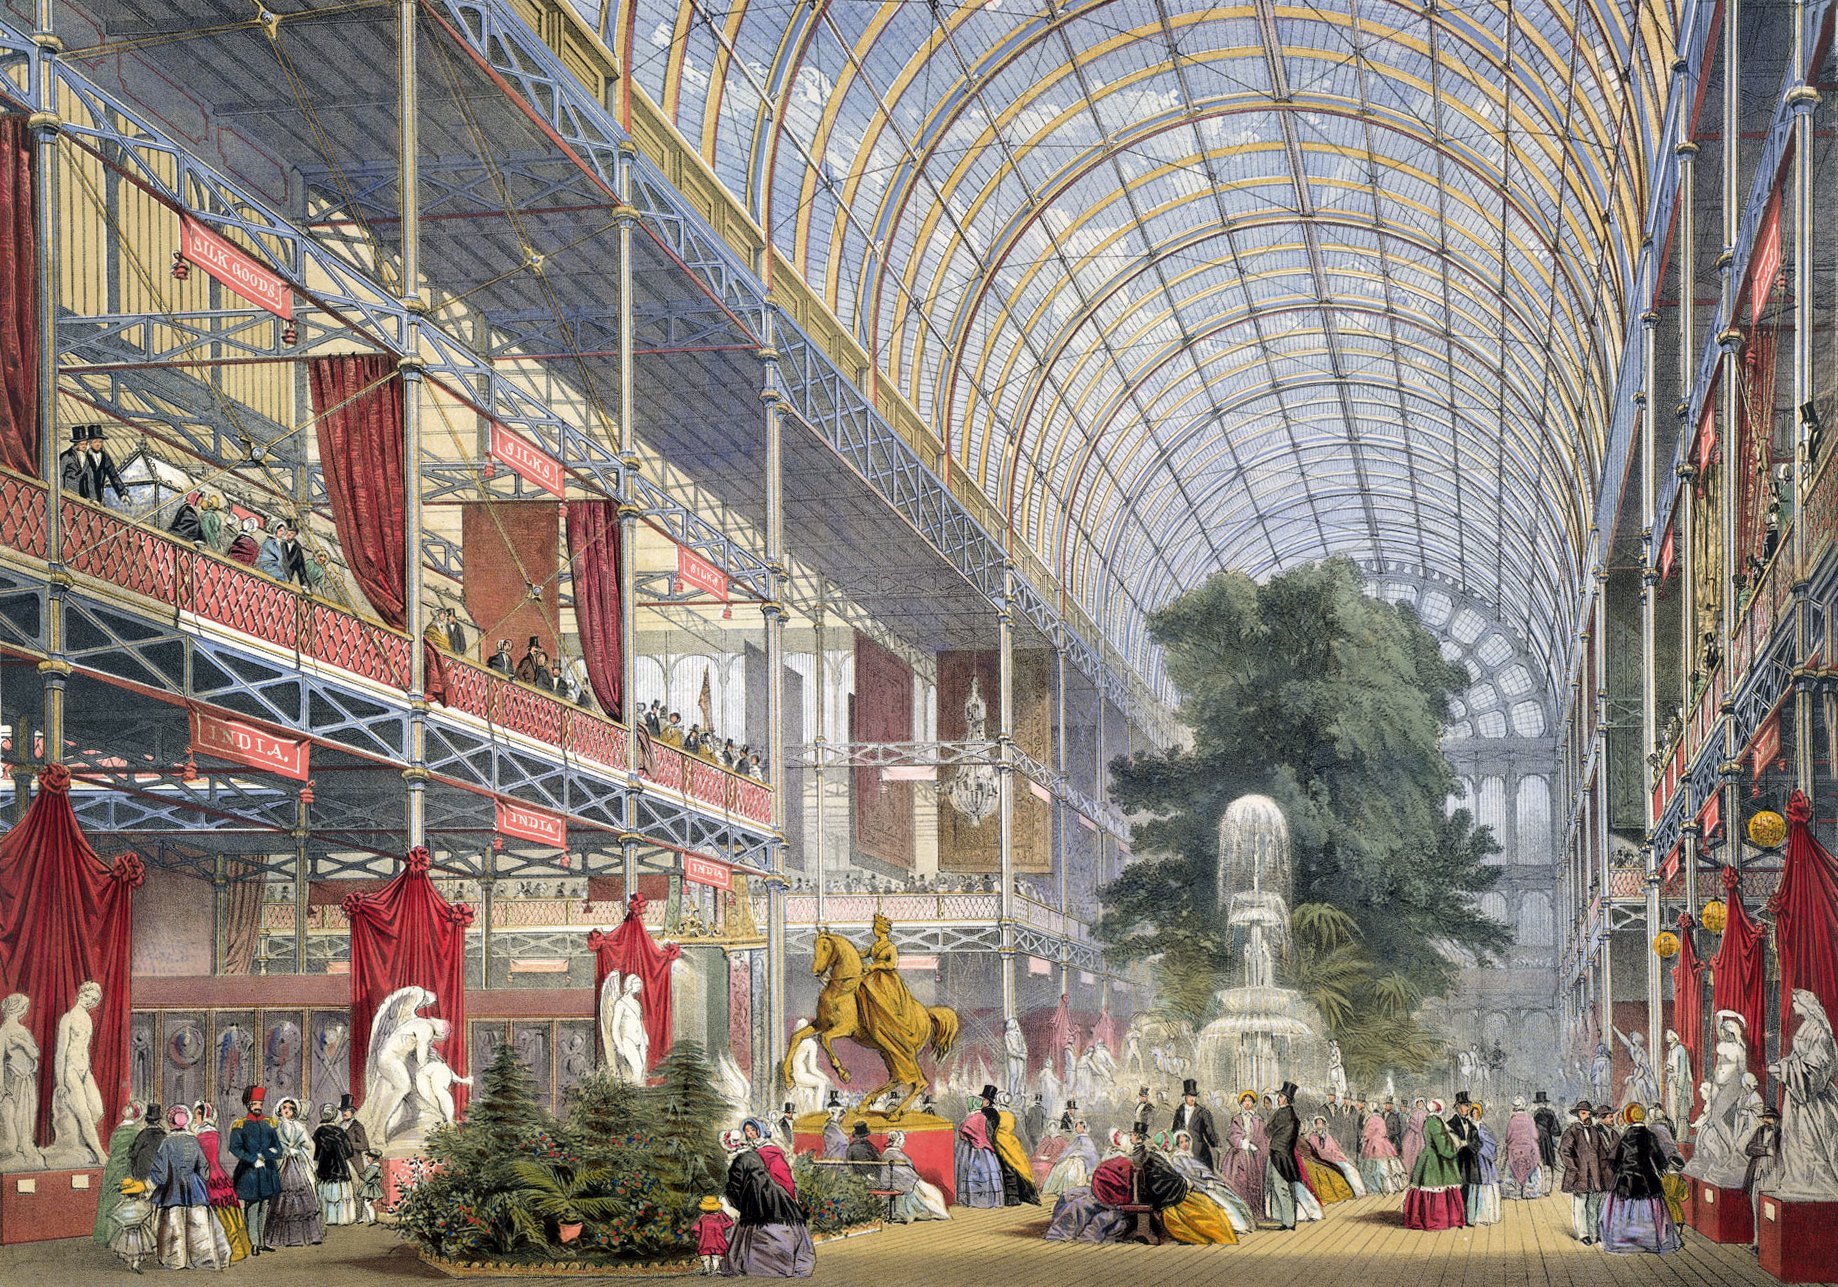 This is an illustration of the interior of the Crystal Palace during the Great Exhibition of 1851. The hall is filled with people and exhibits, including statues, fountains, and a large golden horse. The background shows the sky visible through the glass roof. The illustration is in a realistic style with detailed shading and coloring.